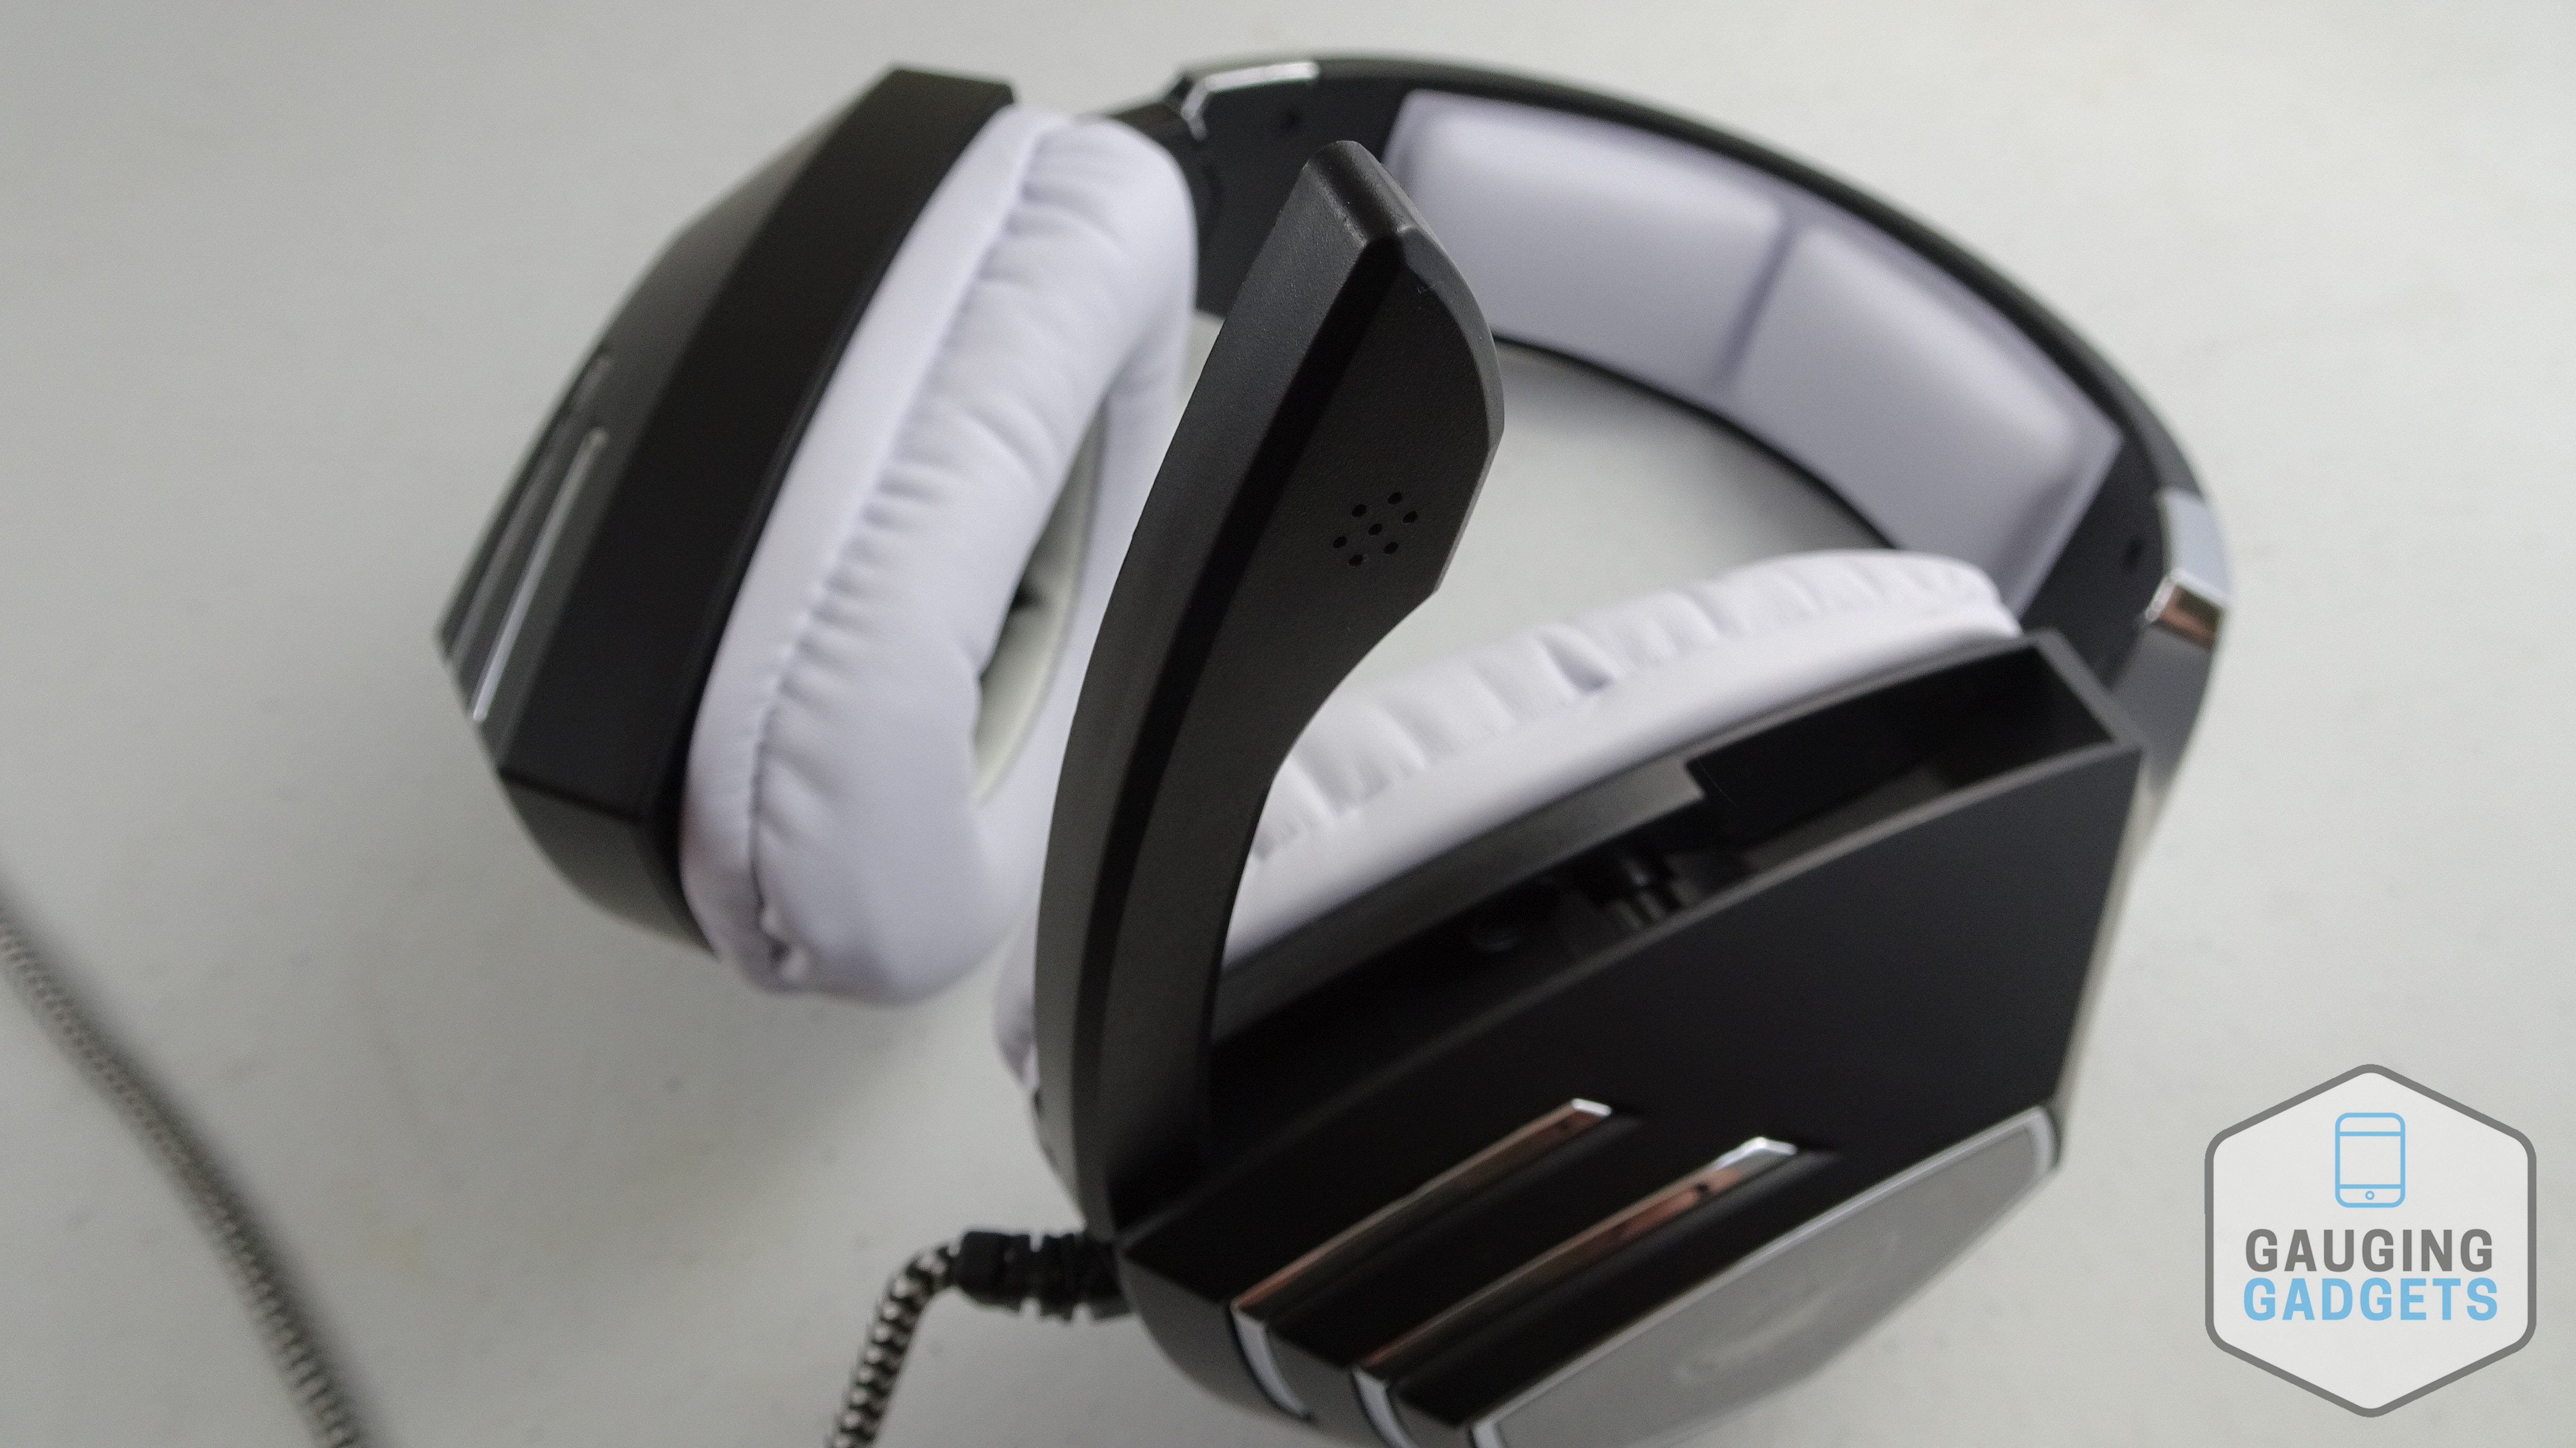 USB Gaming Headset-SADES A60/OMG Computer Over Ear Stereo Heaphones With 